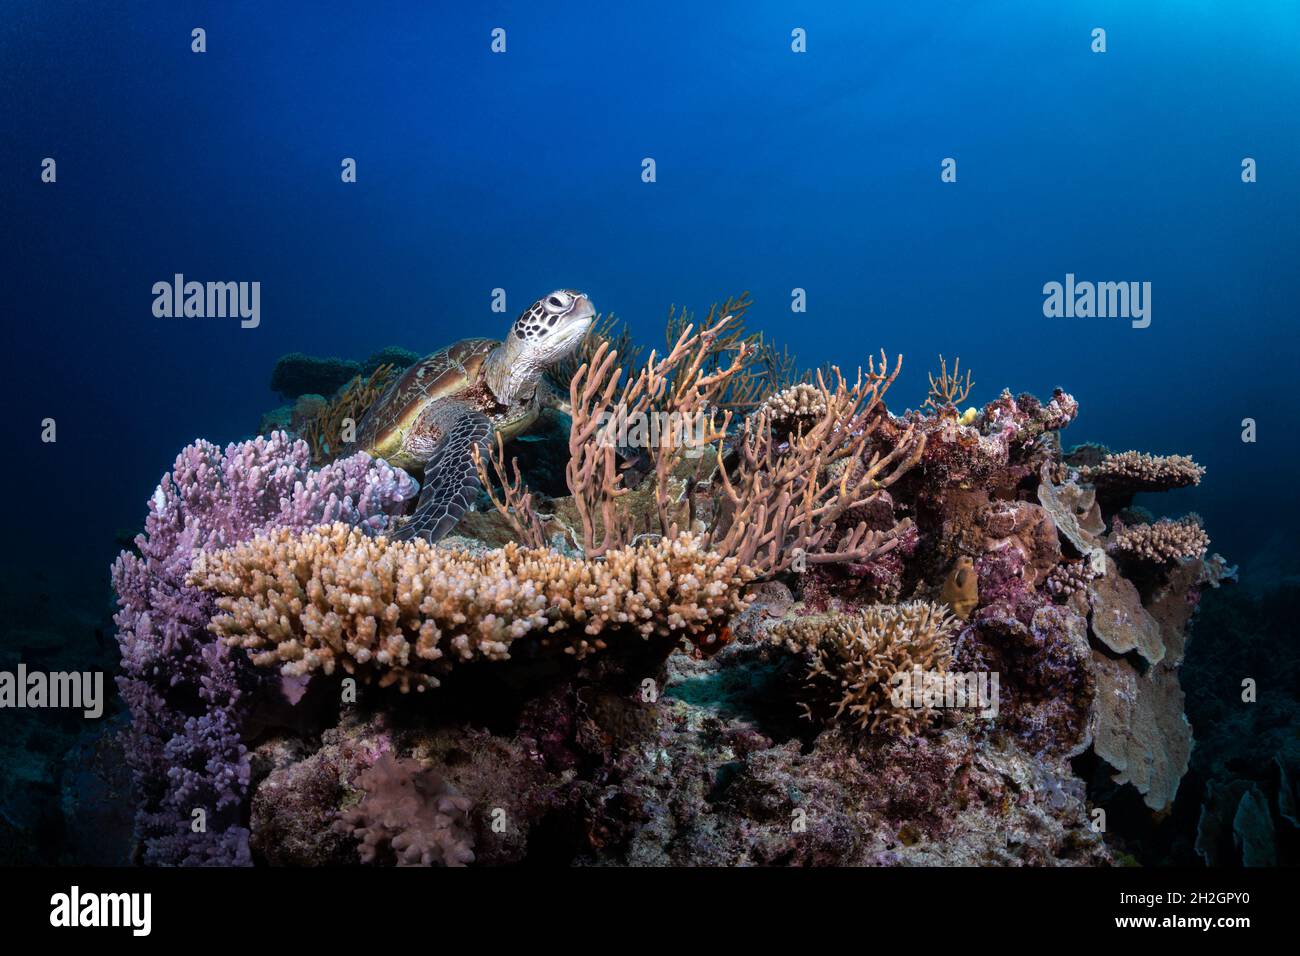 Turtle on Coral Reef, Heron Island, Southern Great Barrier Reef, Queensland, Australia Stock Photo